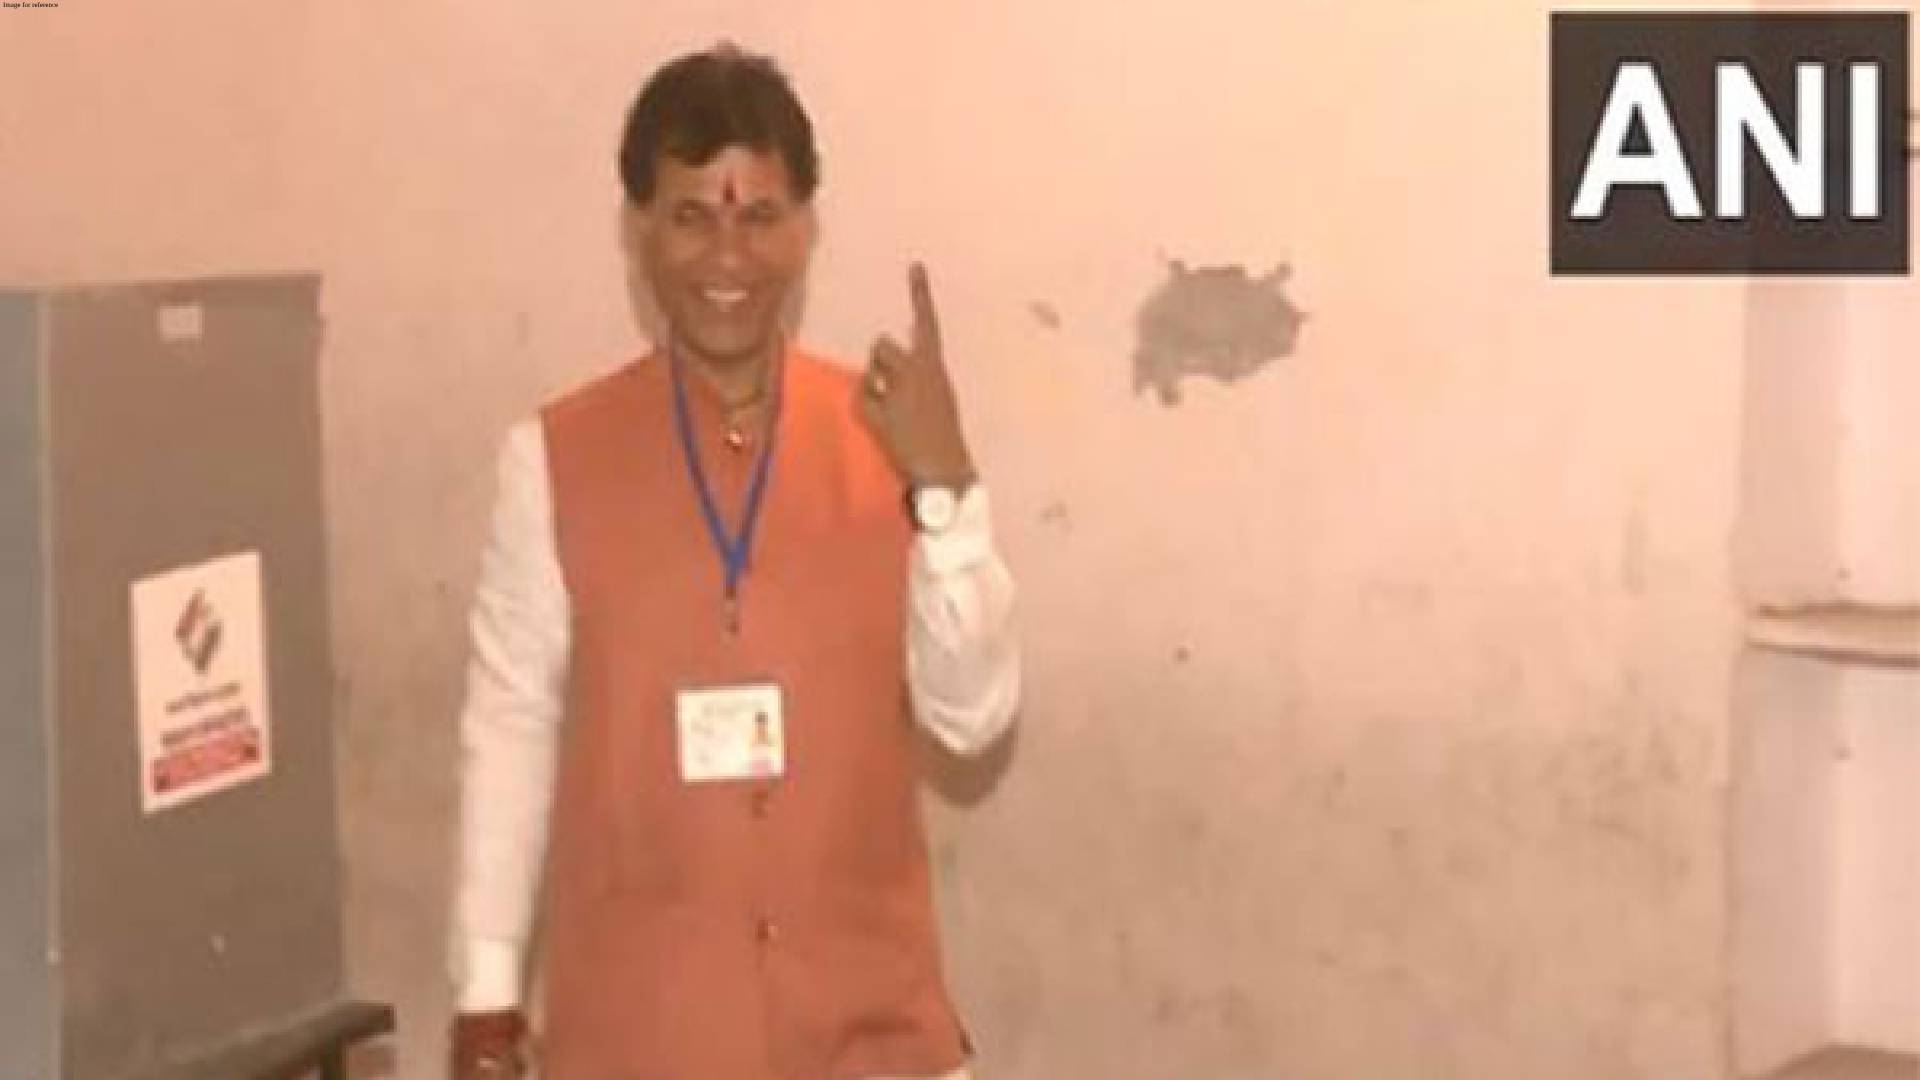 Lok Sabha 2024 polls: BJP candidate from Barmer-Jaisalmer constituency Kailash Choudhary casts his vote